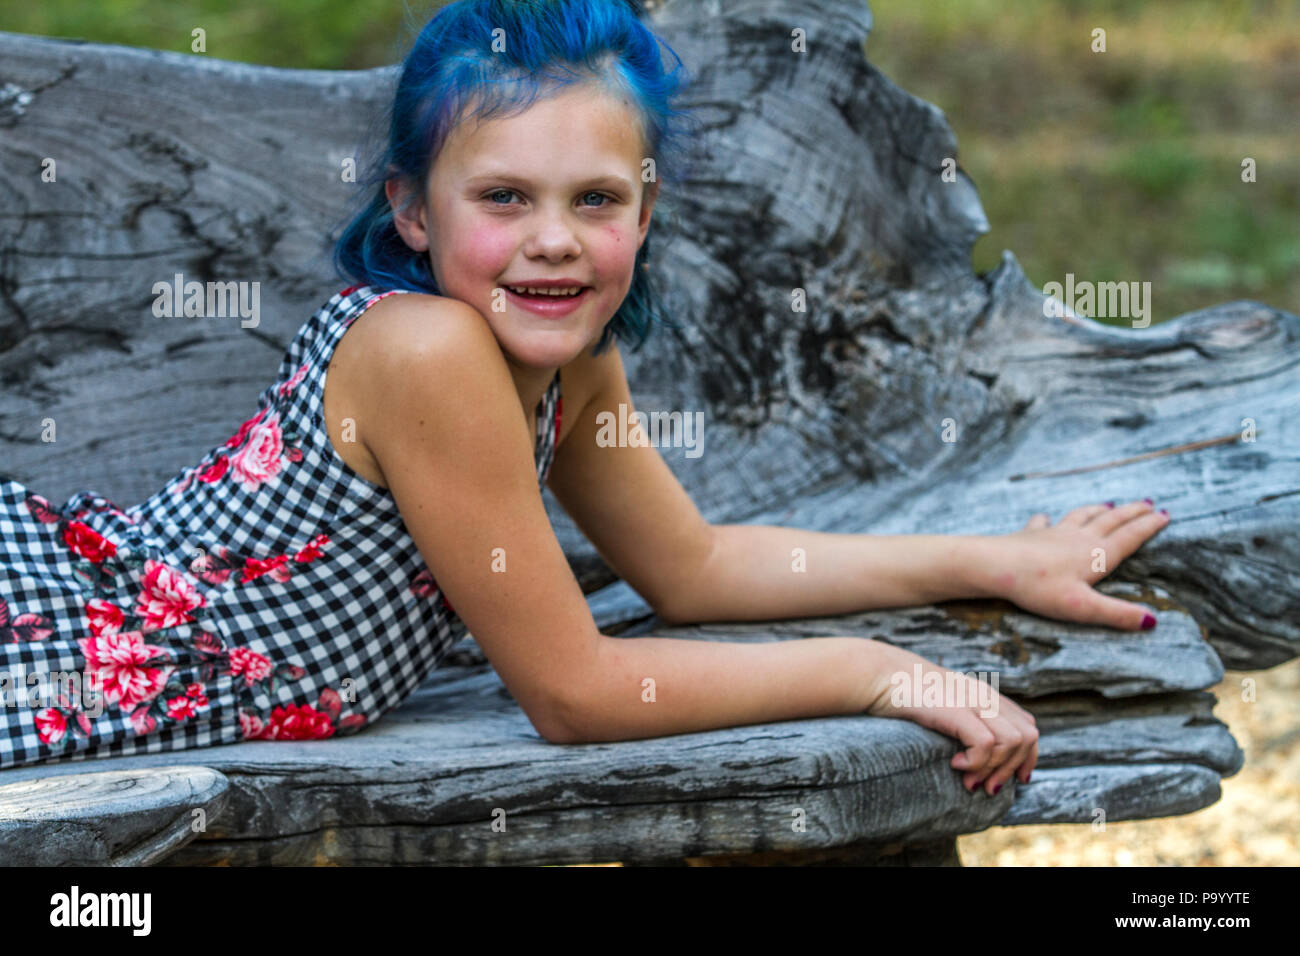 Atrtractive 8 year old girl, in colorful jump suit, hair is dyed bright blue, looking at camera and laying on bench. Model Release #113 Stock Photo